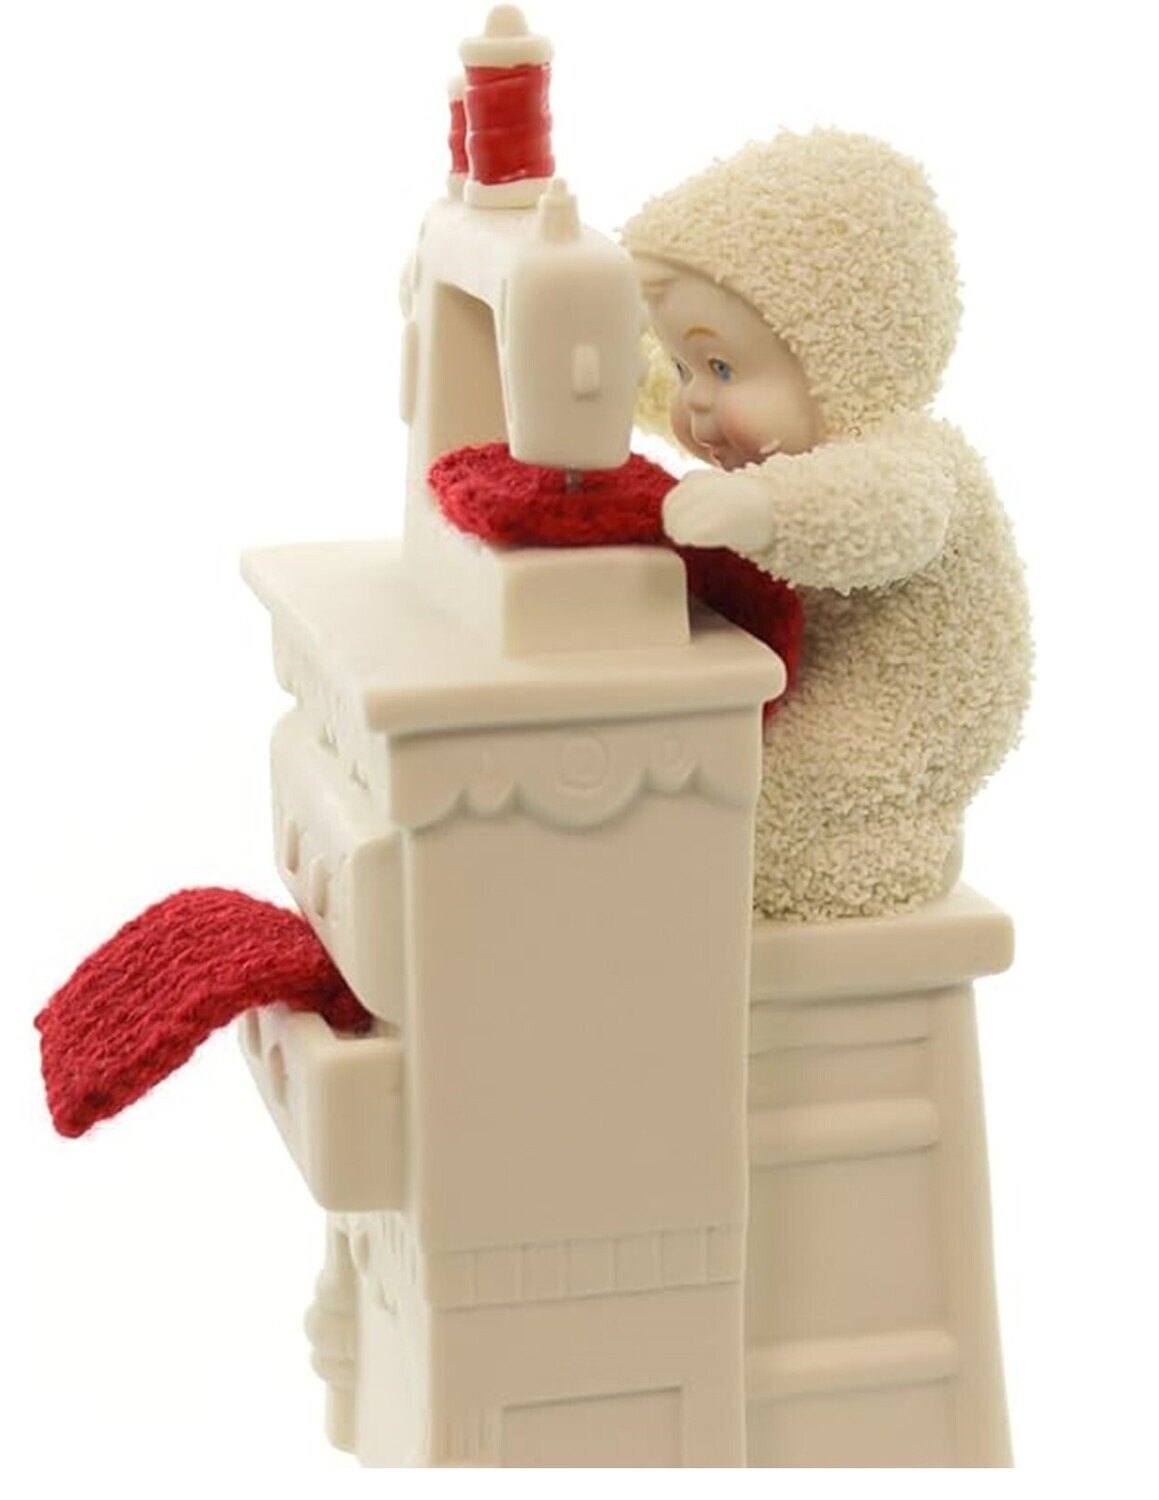 Snowbabies Classics Collection "Stocking Cap Maker" Snowbaby with Sewing Machine 5.98" H Figurine (‎4045670​)